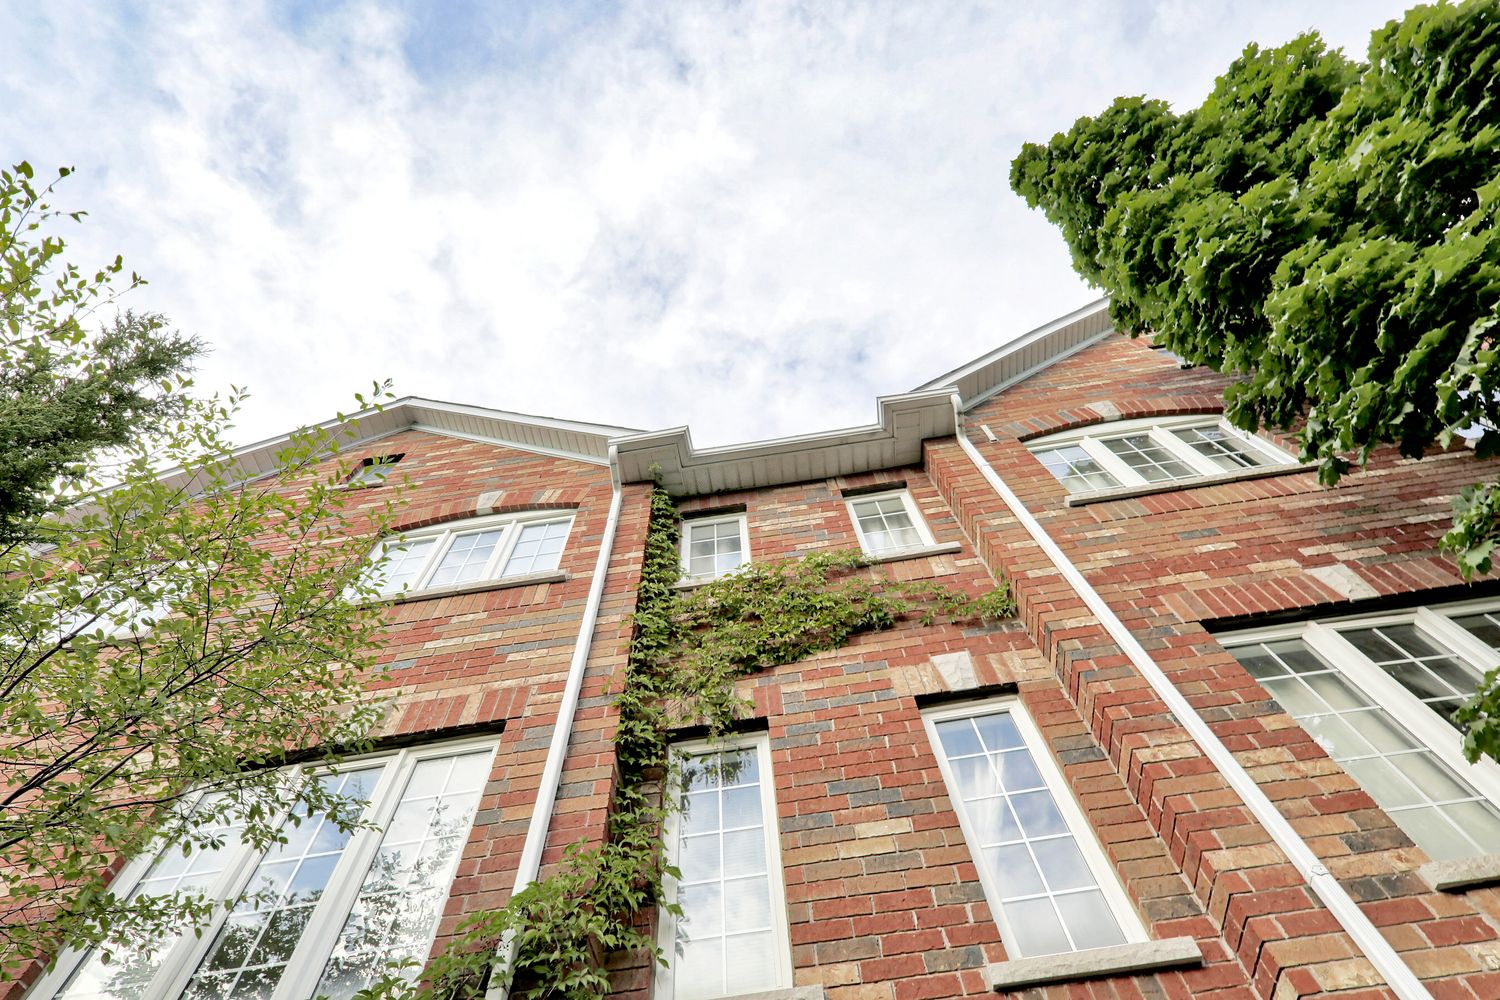 2-96 Birdstone Crescent. Townhomes of St. Clair I is located in  West End, Toronto - image #3 of 4